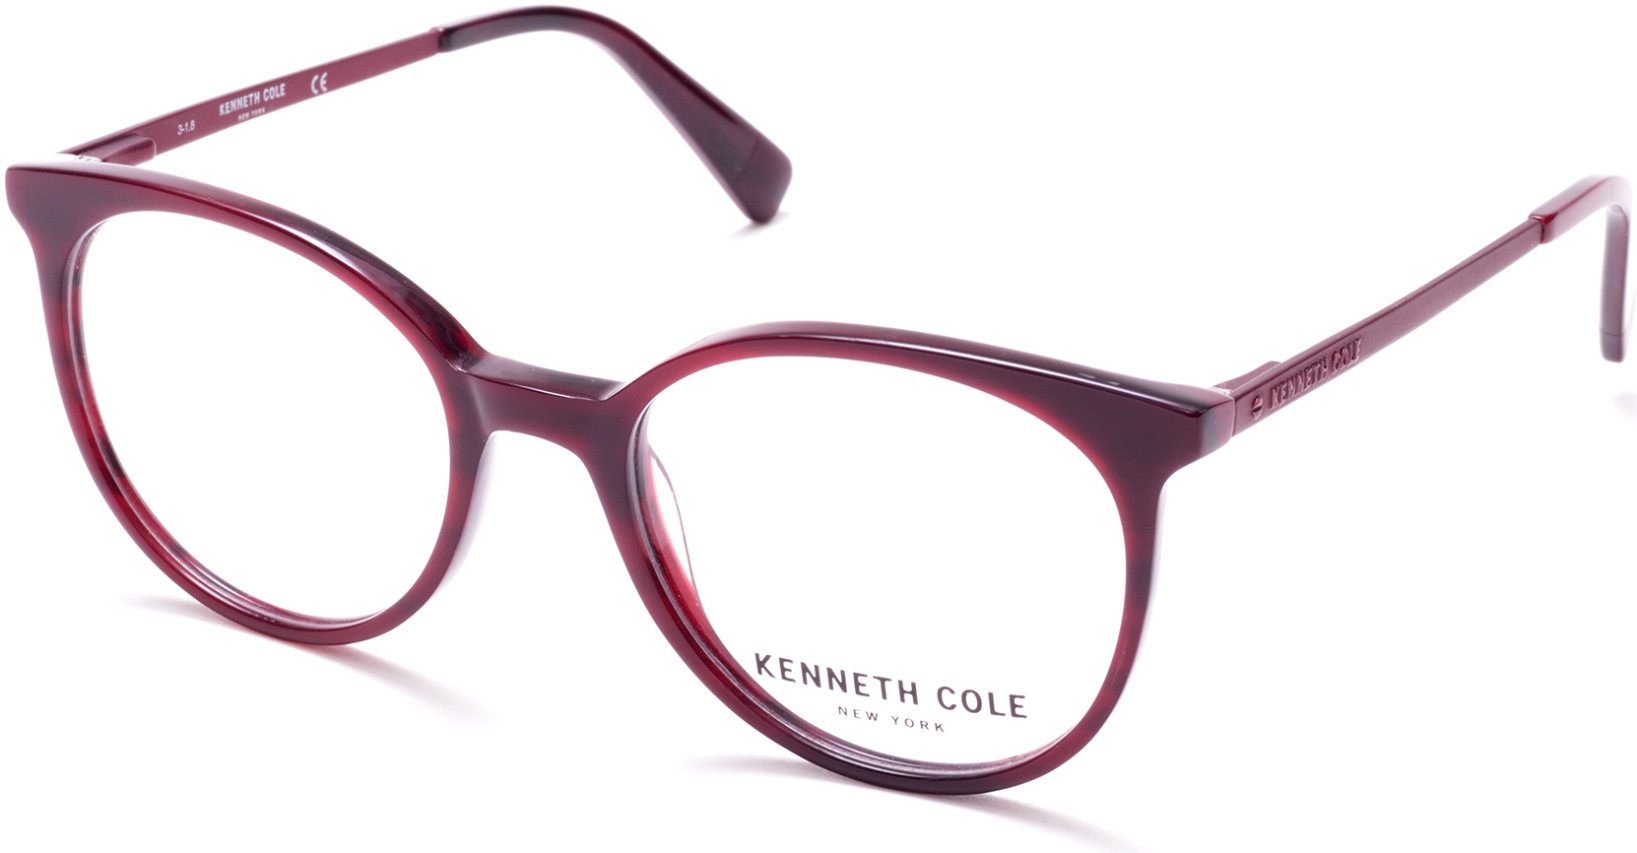 KENNETH COLE NY 0288 066